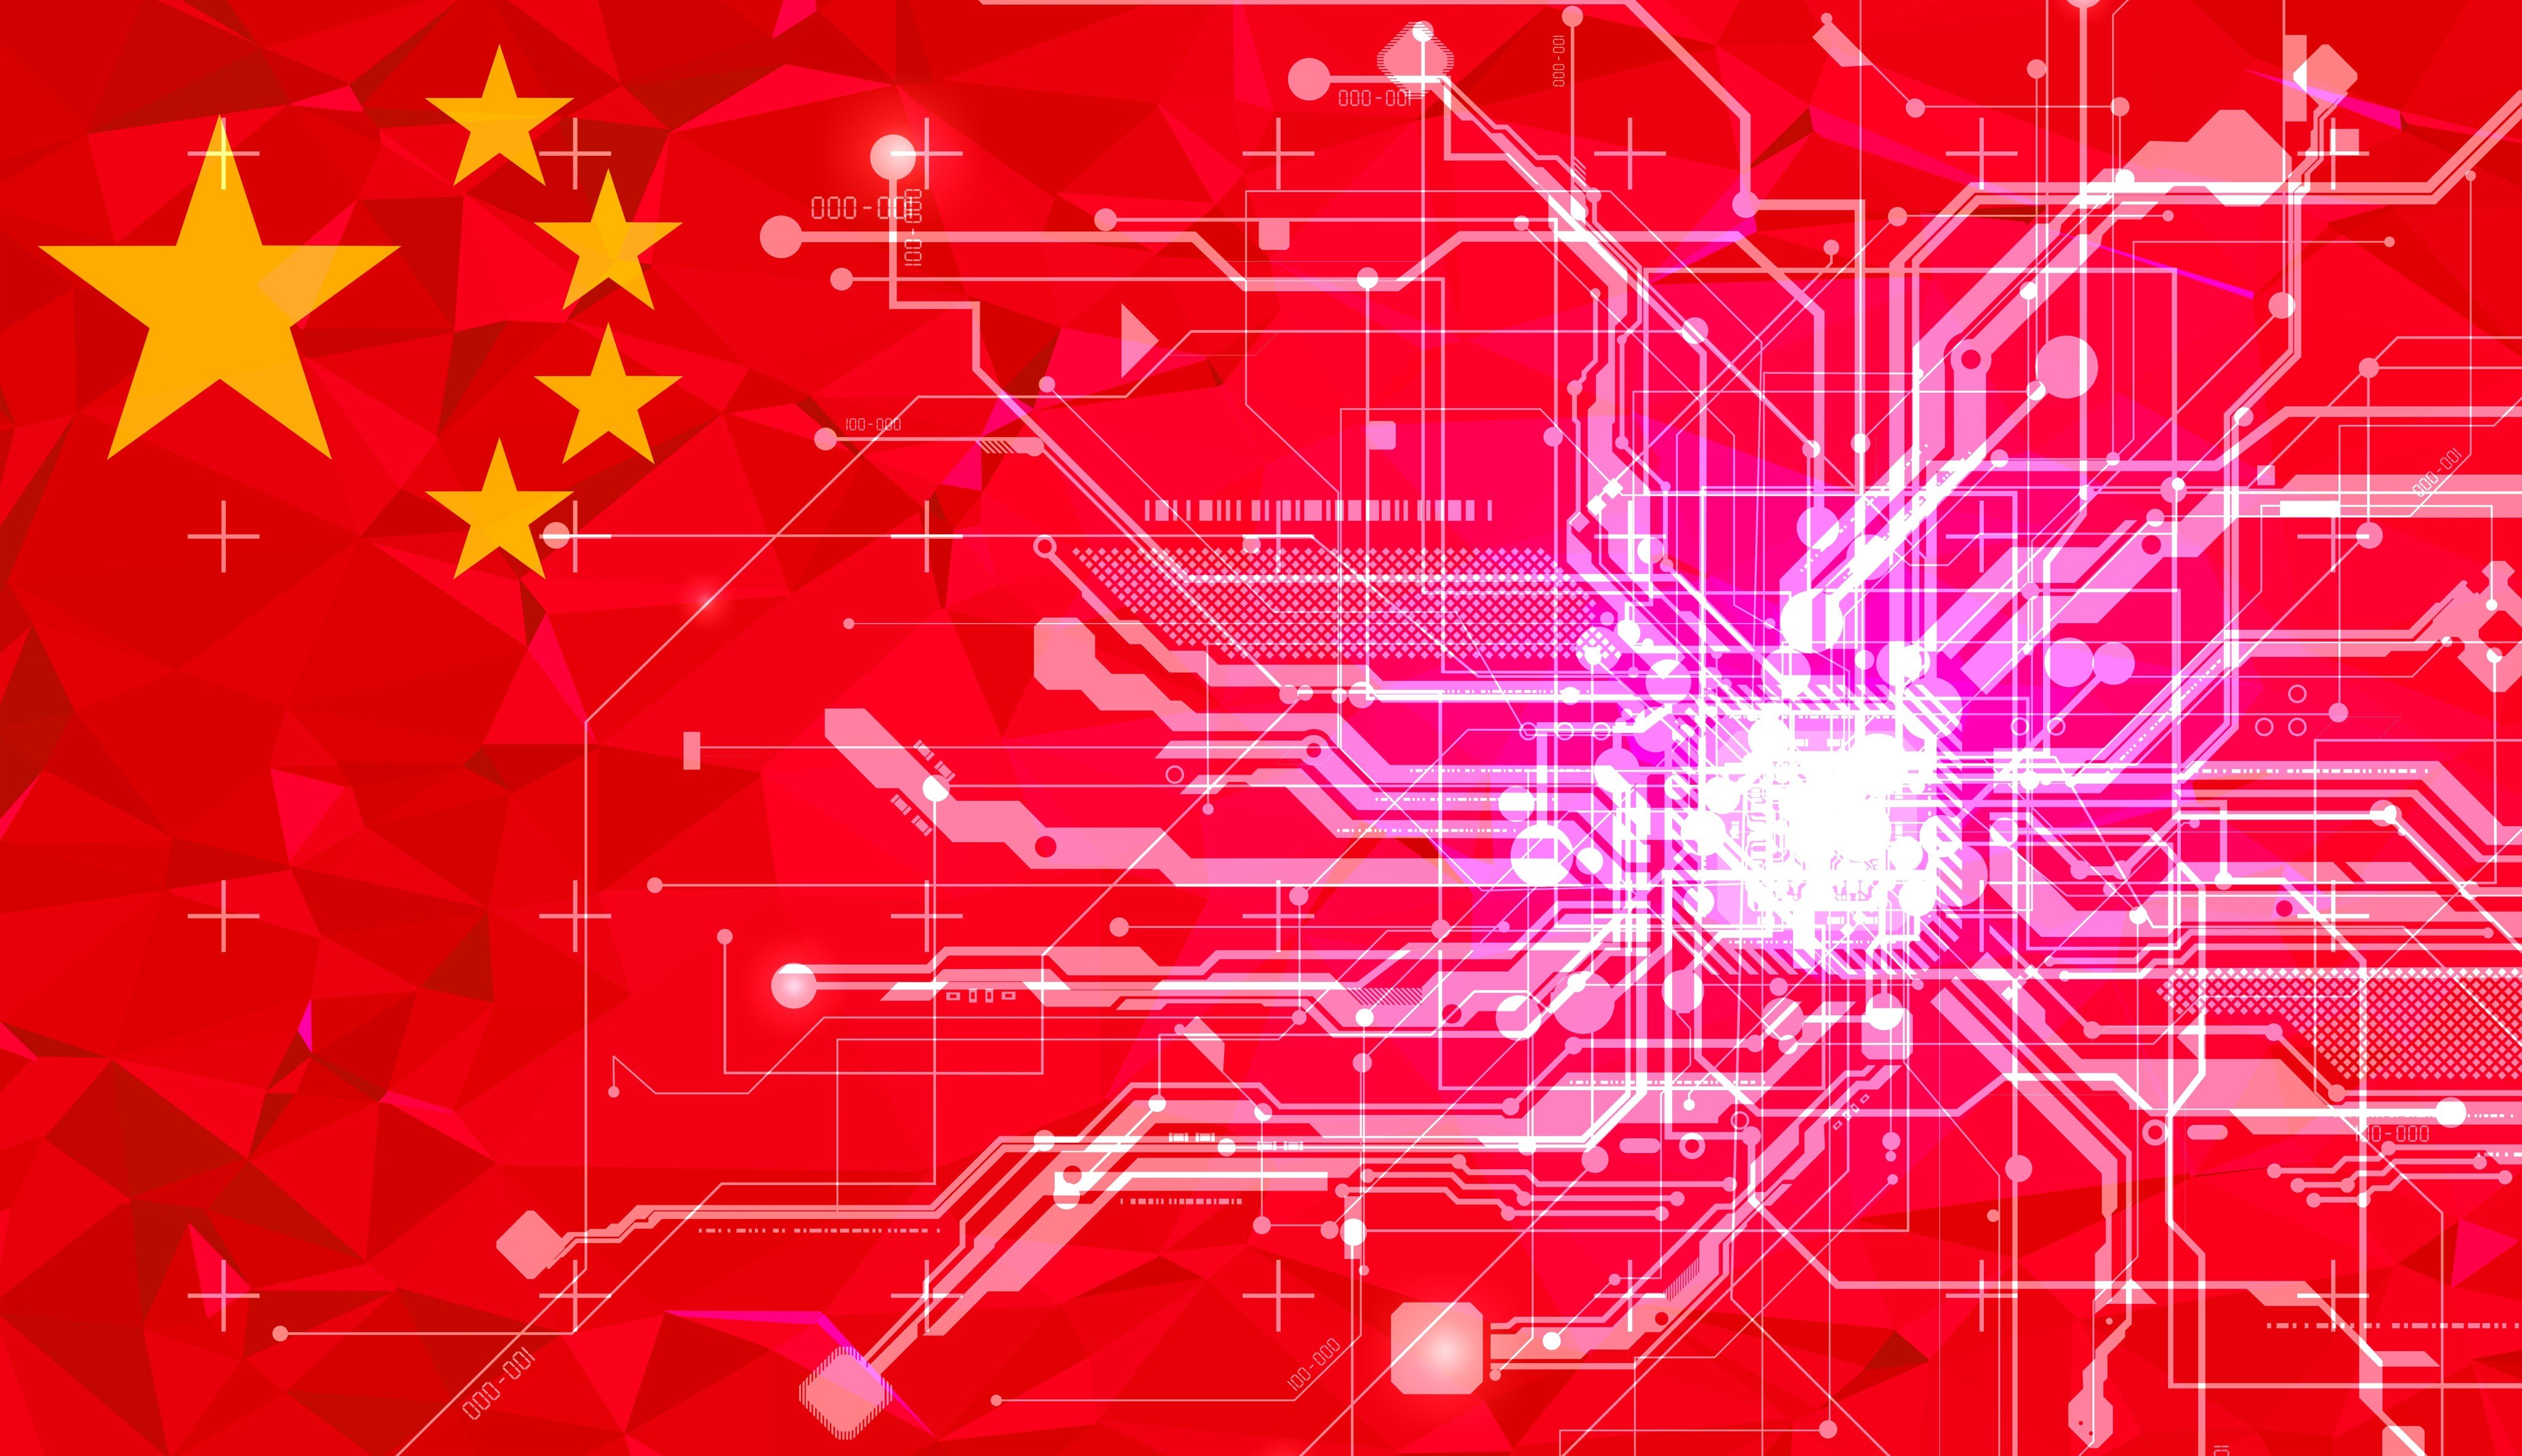 China may be leading the world in supercomputers - secretly - one expert says. Photo: Shutterstock